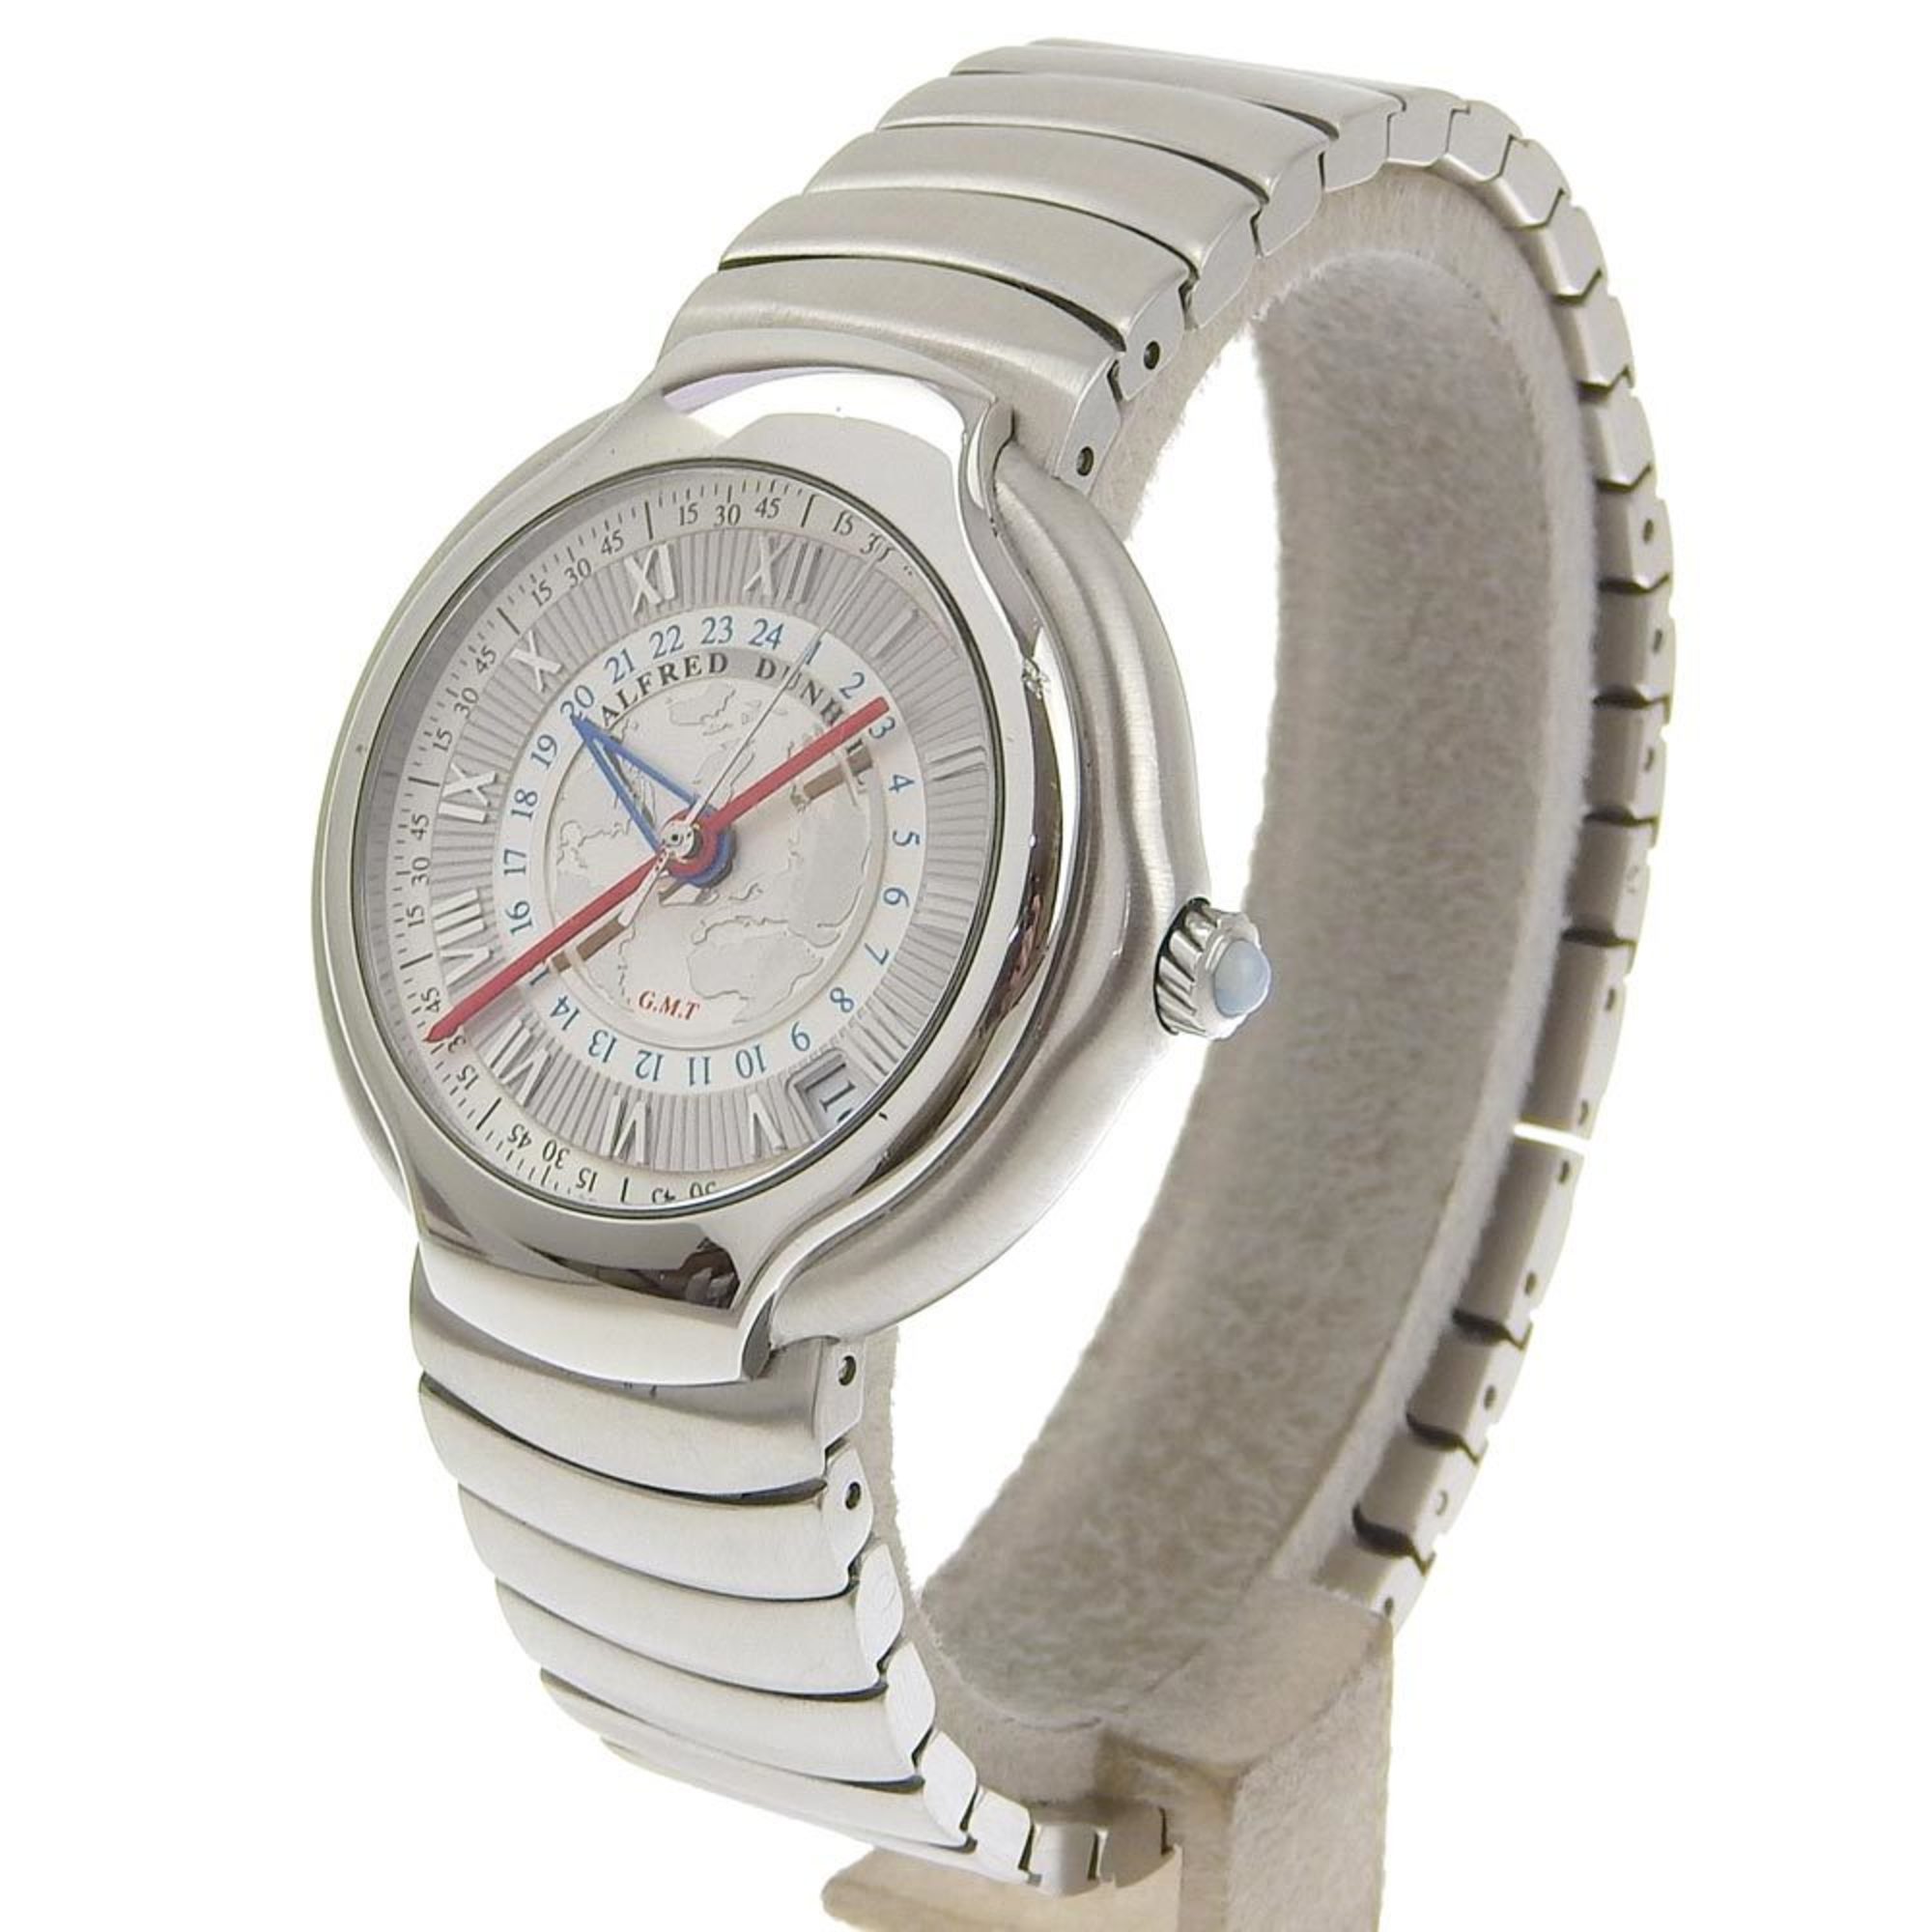 Dunhill Millennium GMT Watch 1844 Limited Edition BB8023 Stainless Steel Automatic White Dial Ladies I120224036